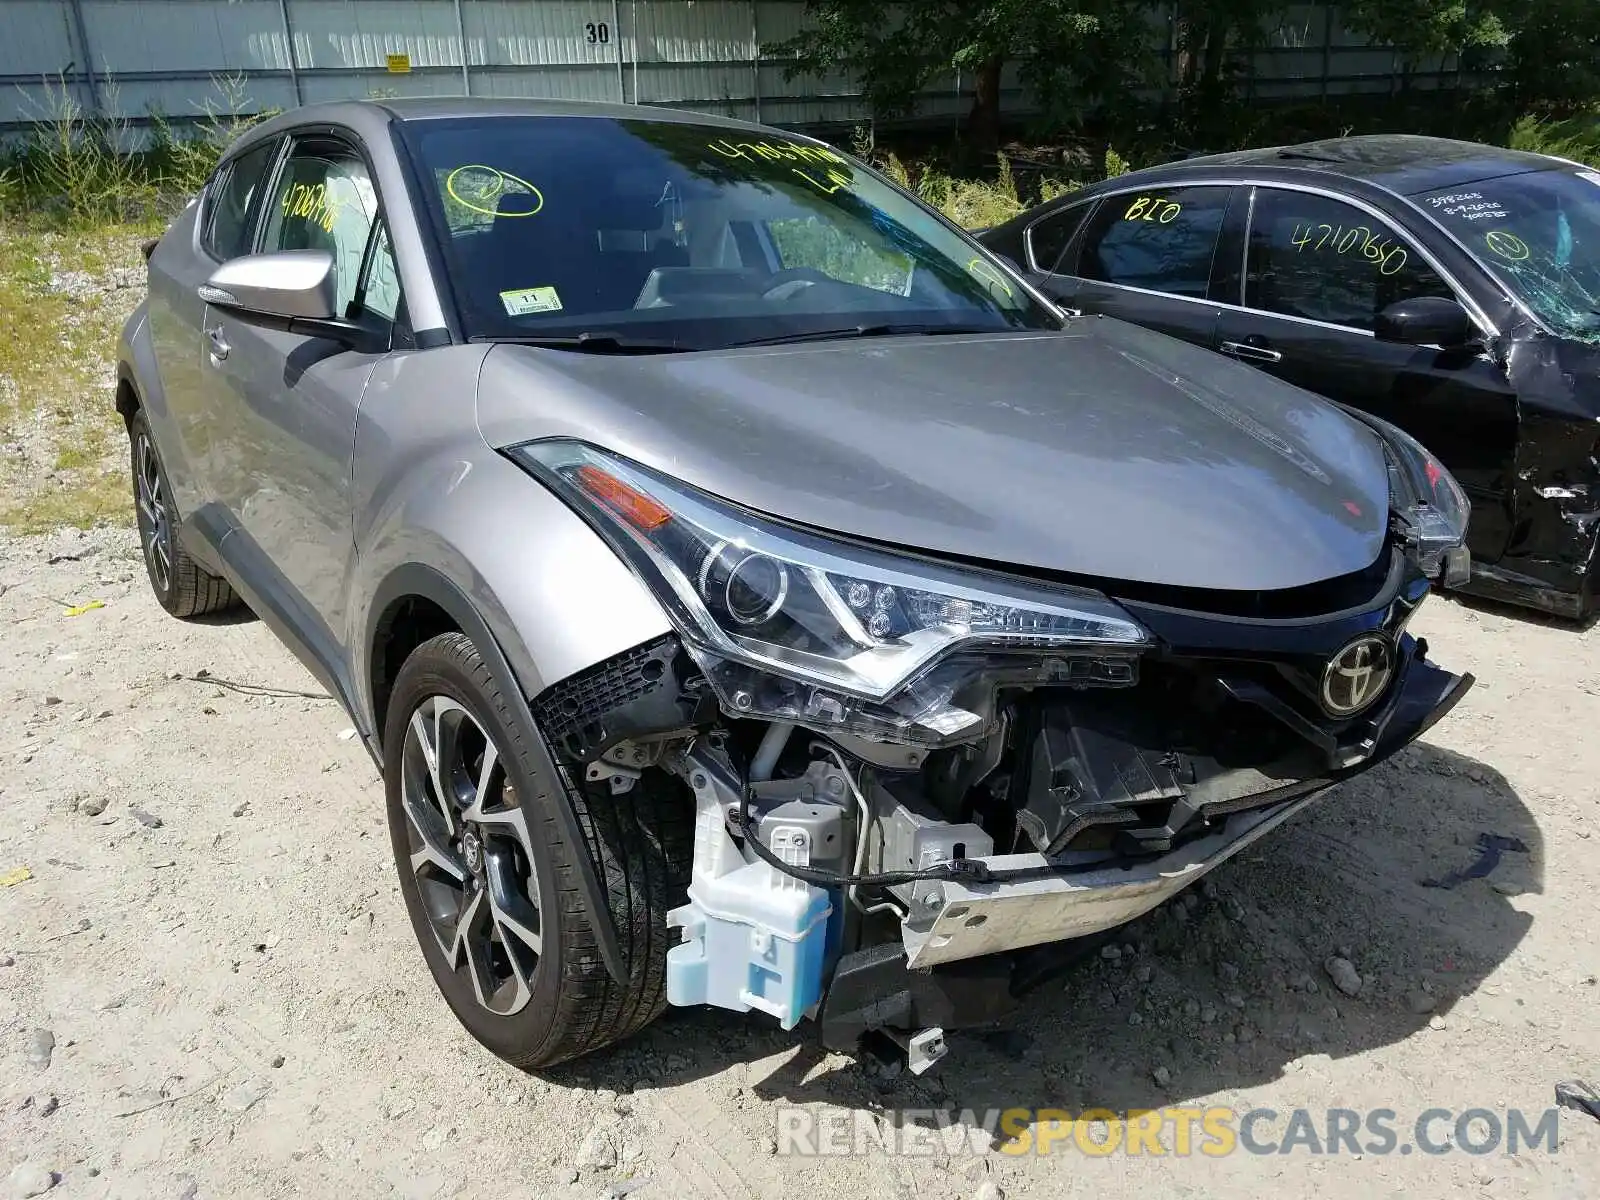 1 Photograph of a damaged car NMTKHMBXXKR069781 TOYOTA C-HR 2019